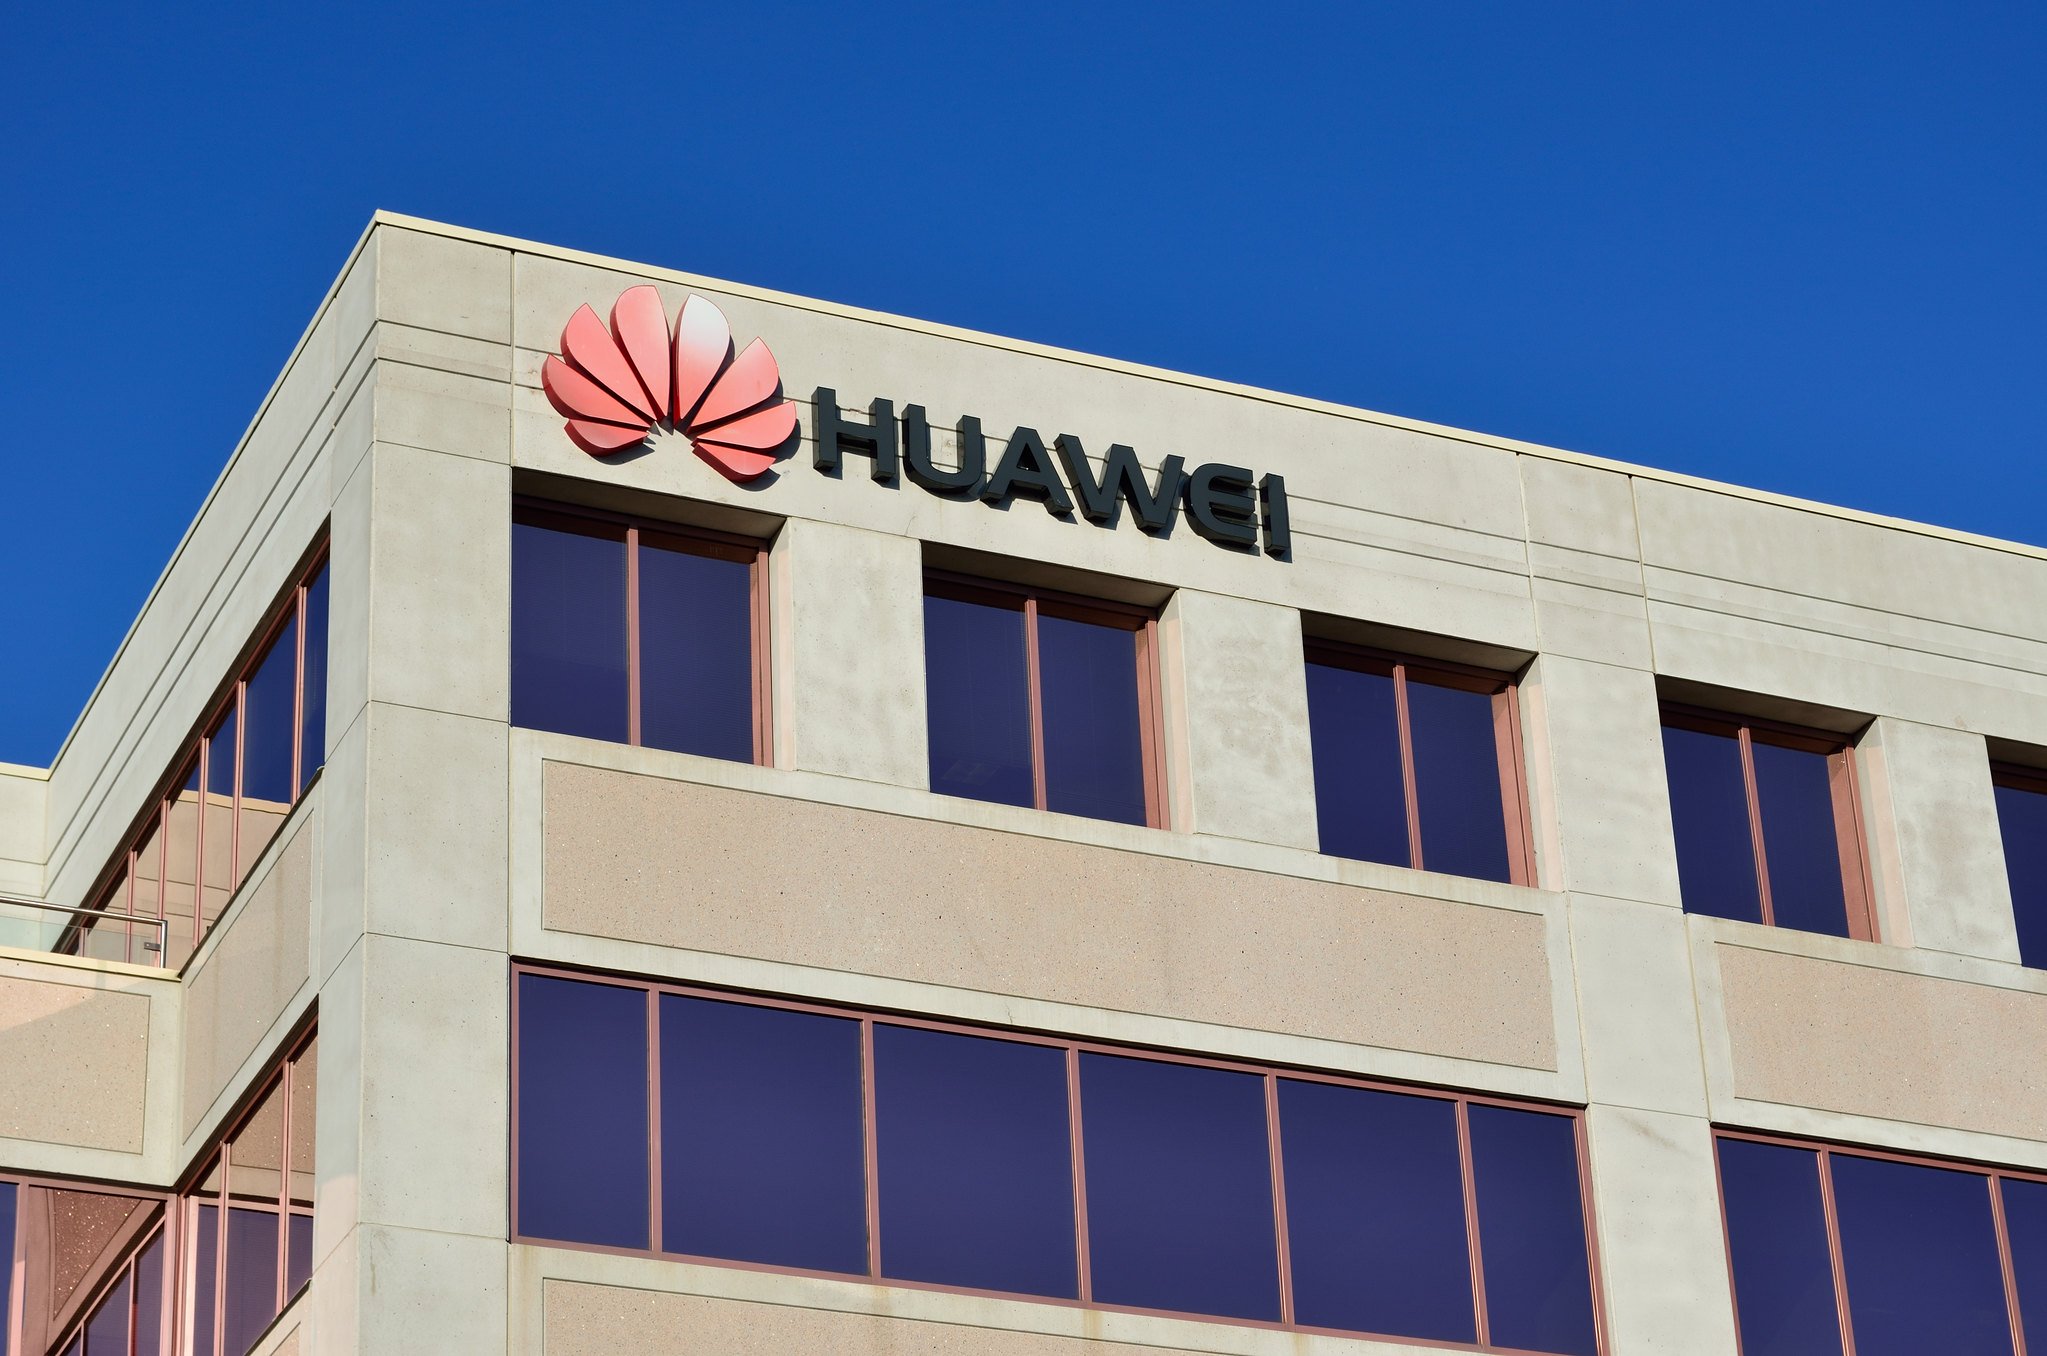 Huawei patents technology that can charge devices wirelessly from a distance